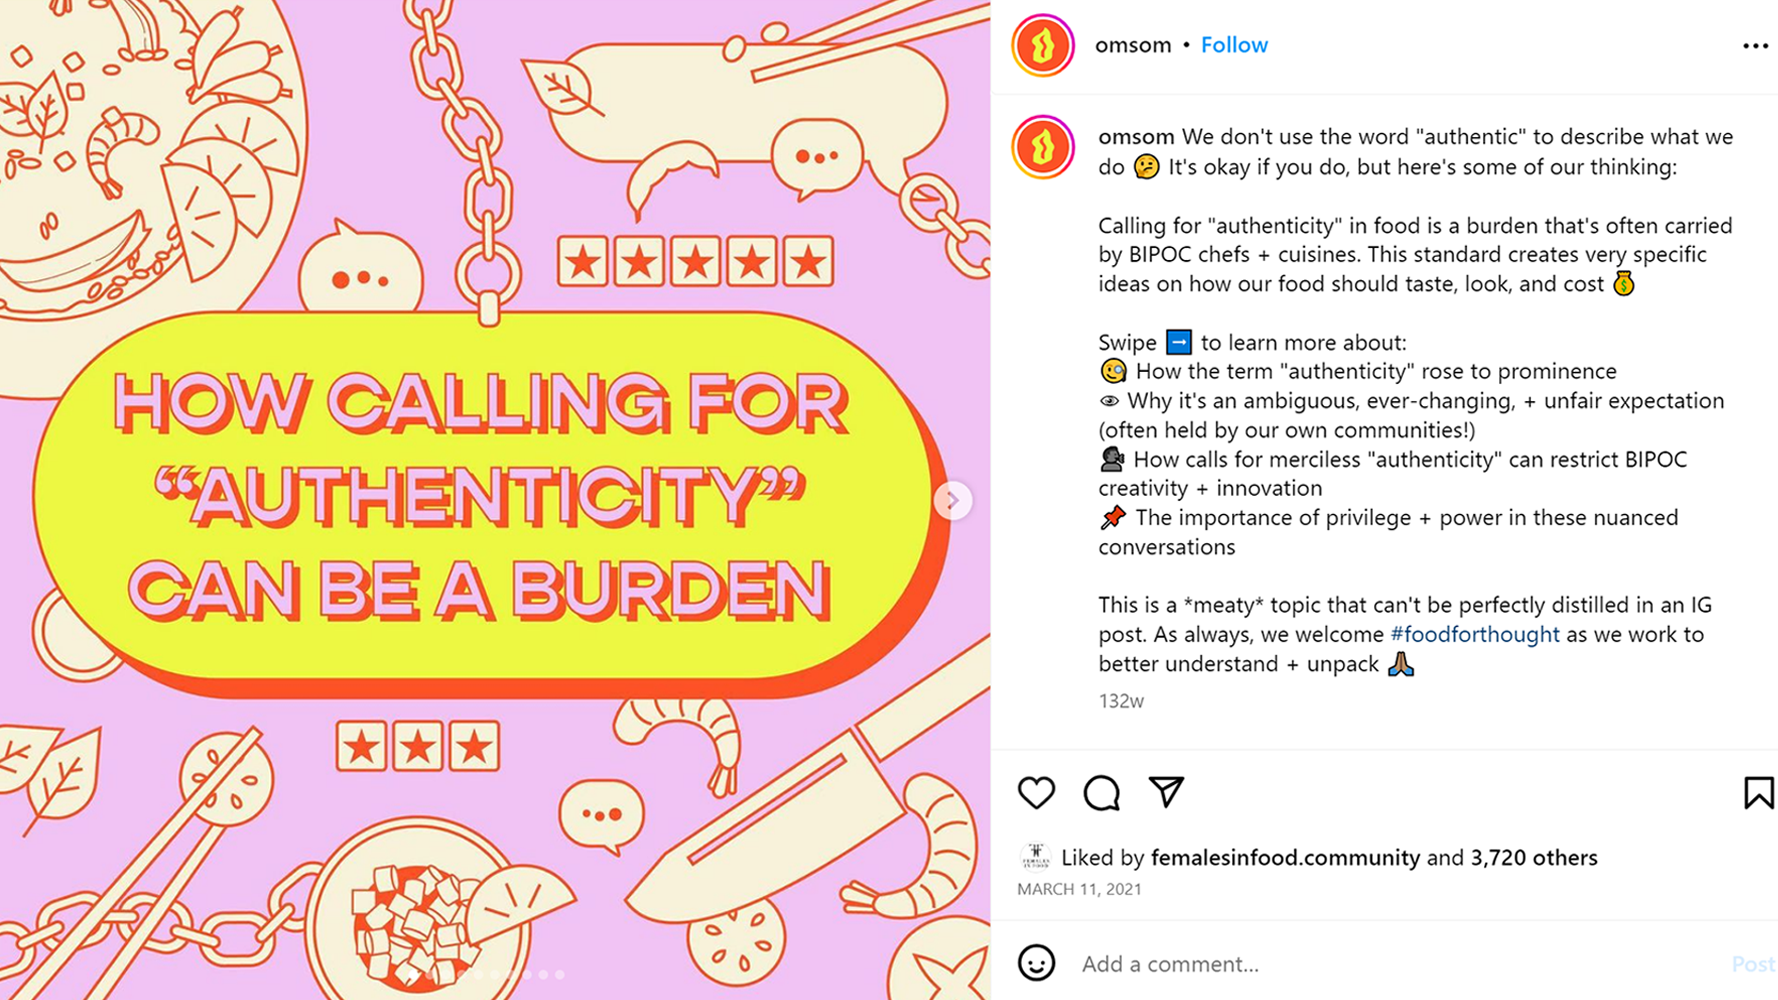 Omsom Instagram post regarding the use of authenticity, from March 11, 2021